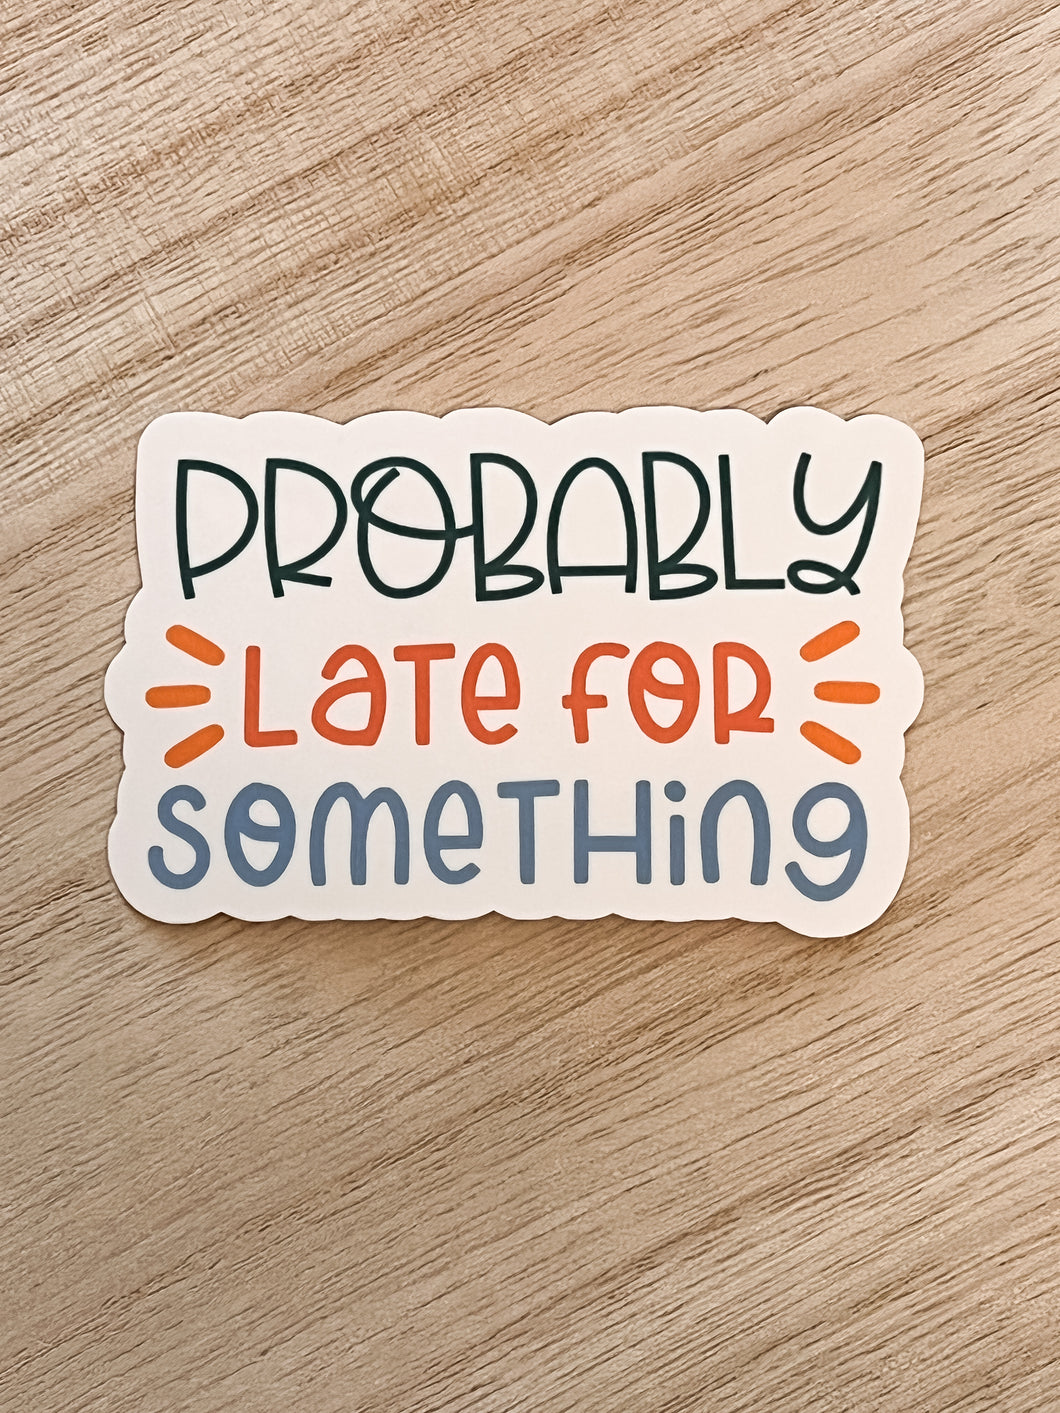 Probably Late For Something - Sticker